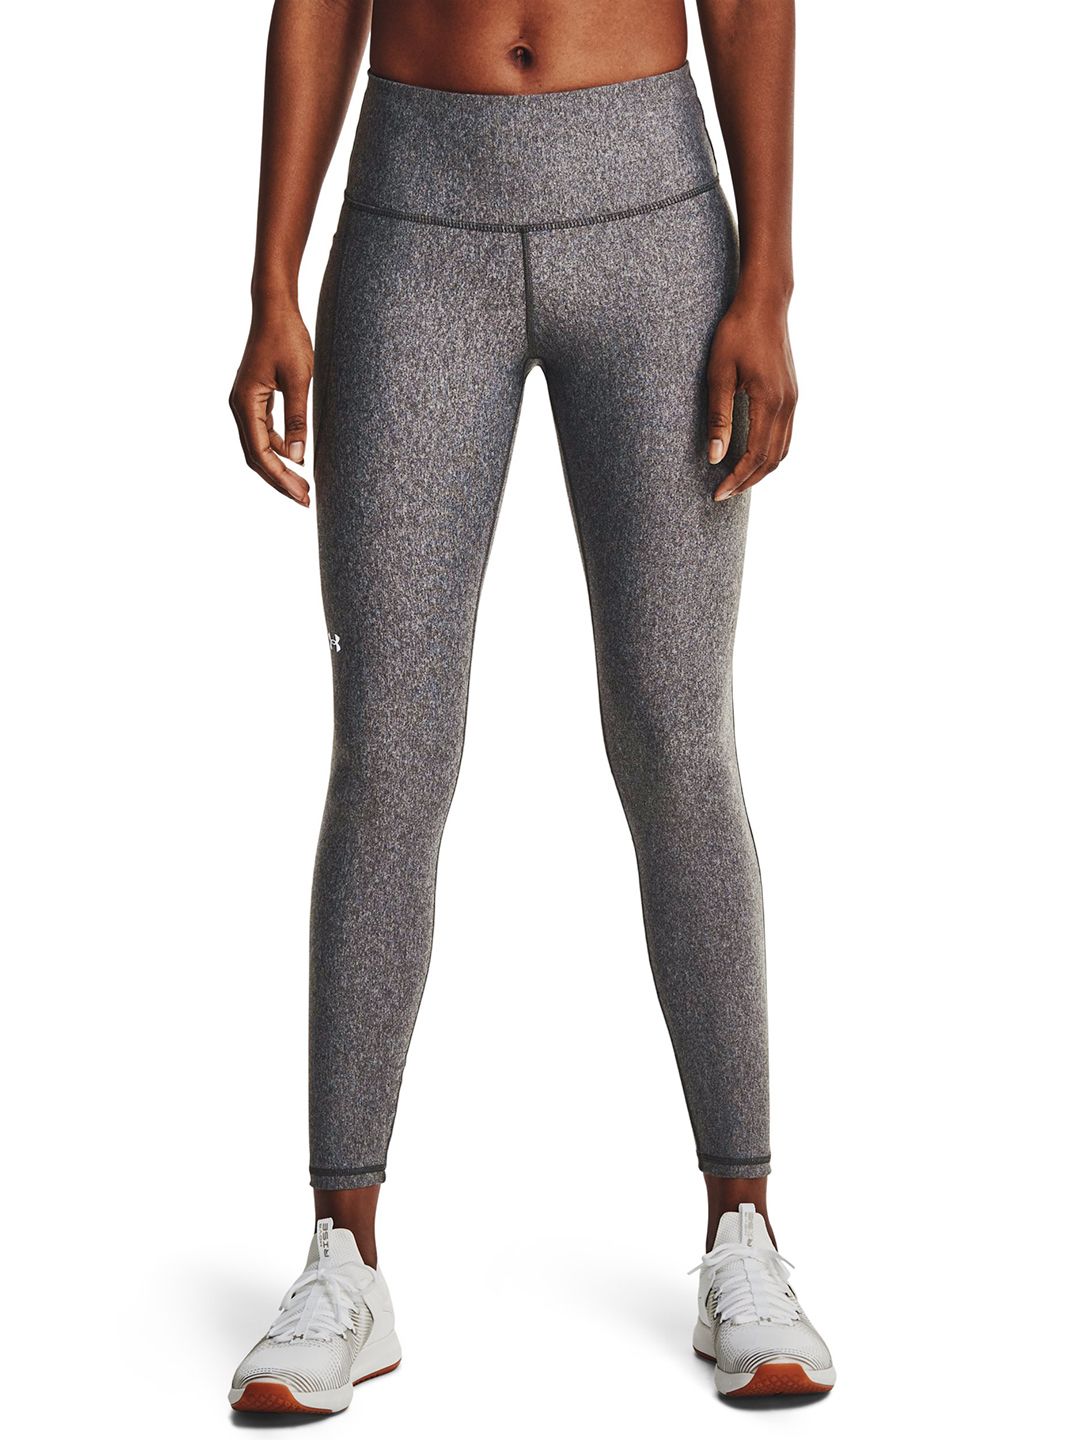 UNDER ARMOUR Women Grey Heat Gear High-Rise No-Slip Waistband Full-Length Tights Price in India